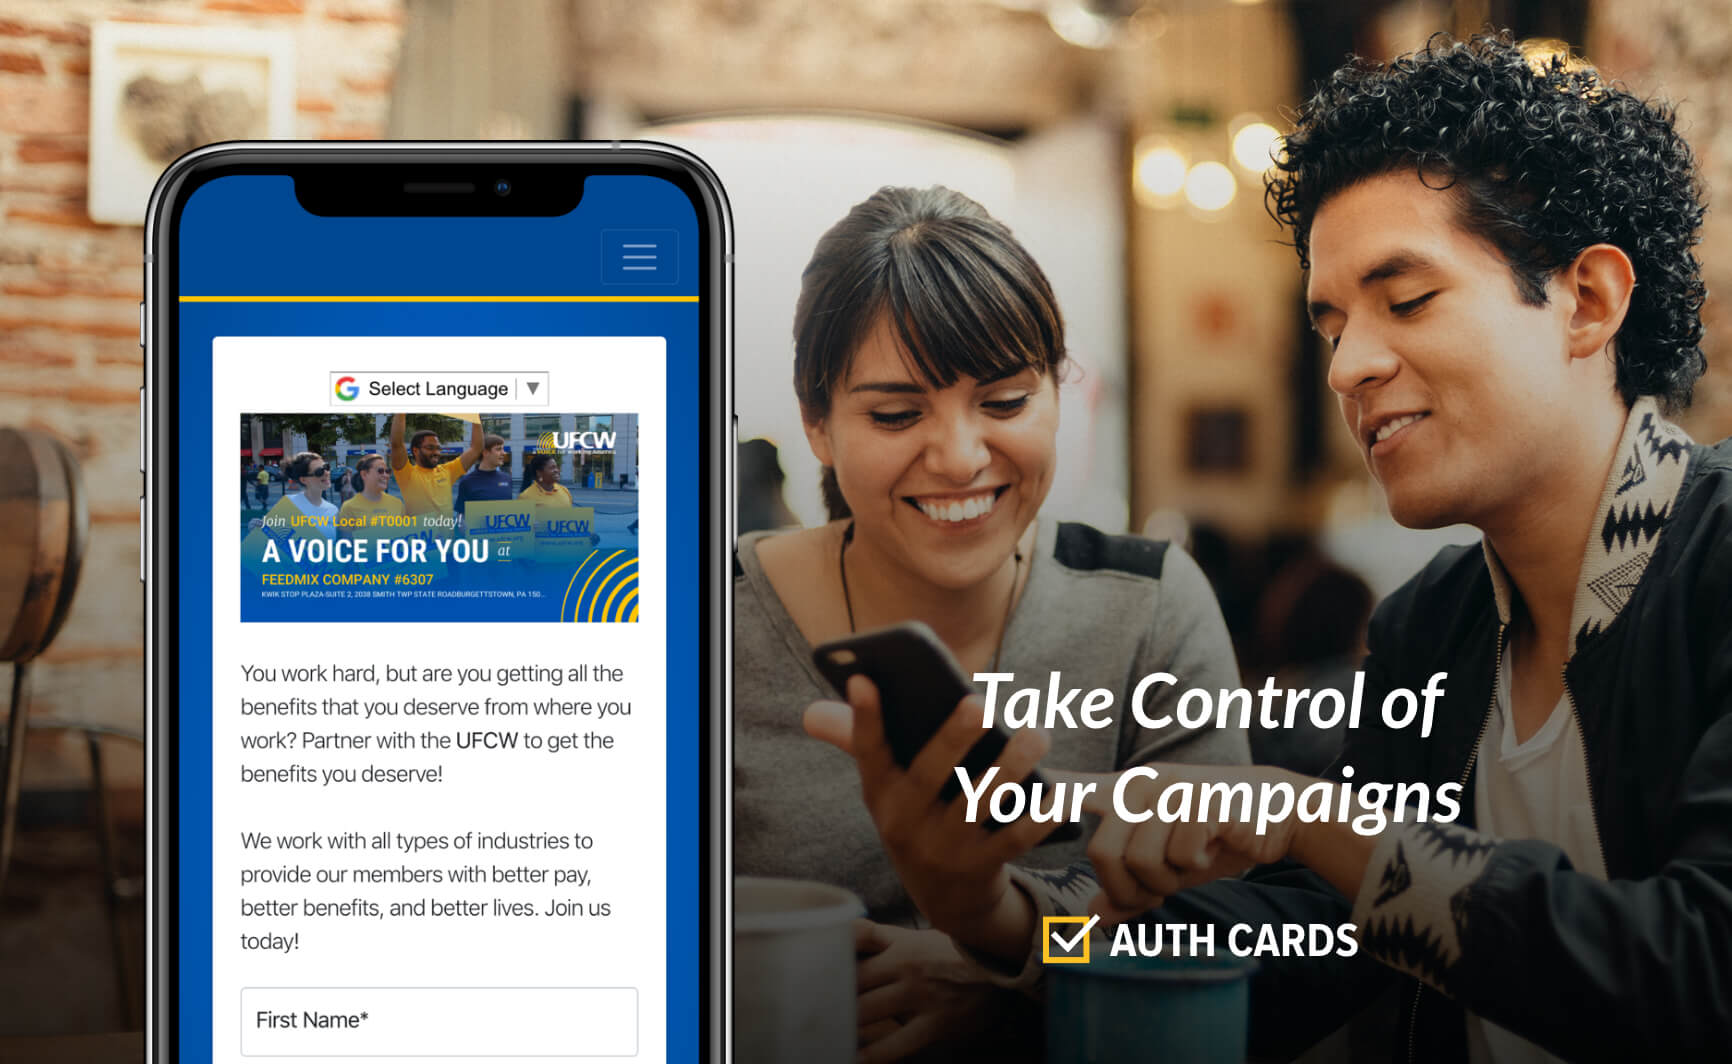 Take Control of Your Campaigns with Auth Cards